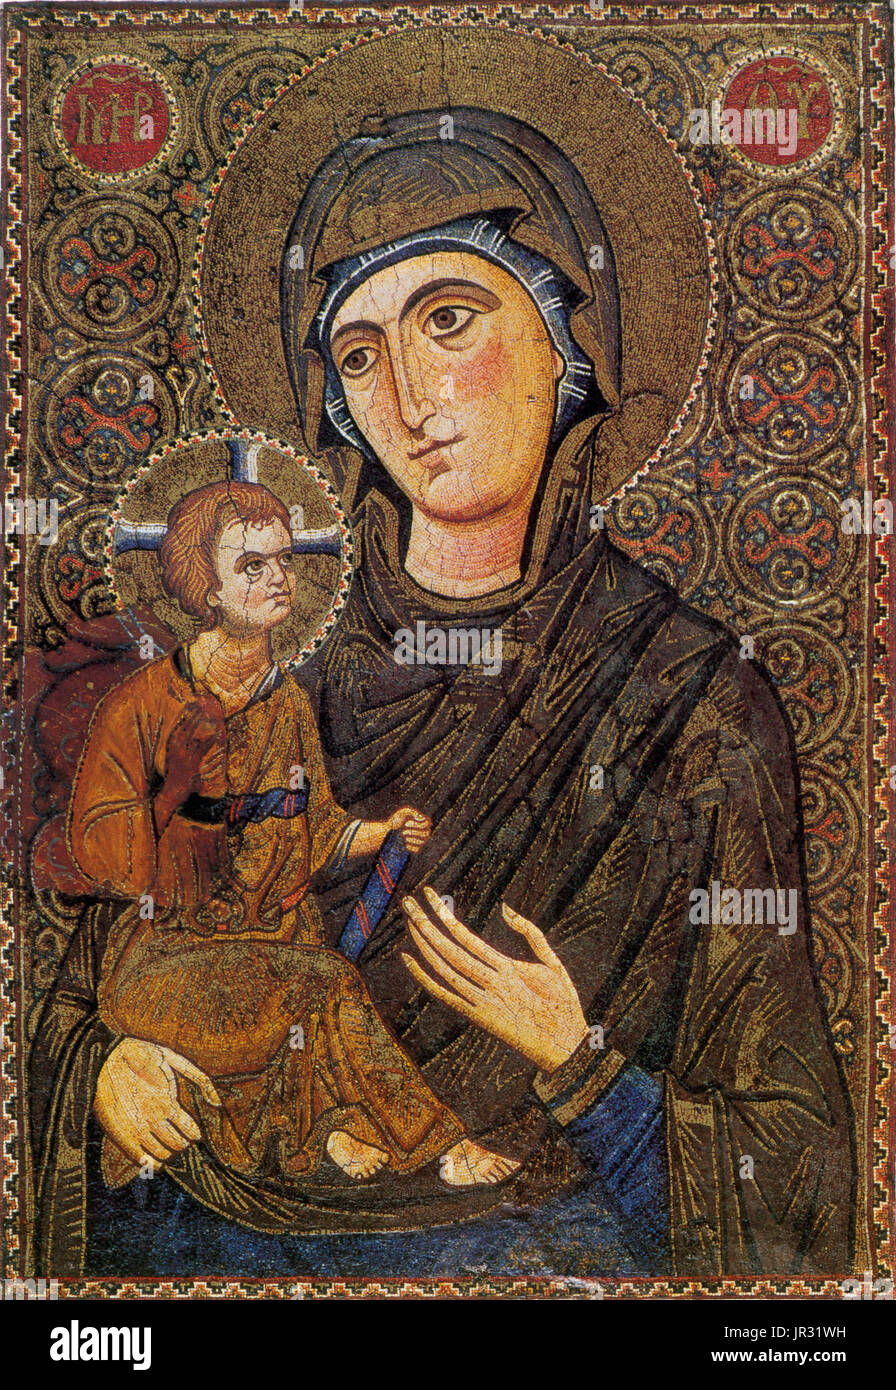 Saint Catherine's Monastery, Madonna and child, 13th century. A Hodegetria is an iconographic depiction of the Theotokos (Virgin Mary) holding the Child Jesus at her side while pointing to Him as the source of salvation for humankind. In the Western Church this type of icon is sometimes called Our Lady of the Way. Saint Catherine's Monastery lies on the Sinai Peninsula, at the mouth of a gorge at the foot of Mount Sinai, in the city of Saint Catherine, Egypt in the South Sinai Governorate. The monastery is controlled by the autonomous Church of Sinai, part of the wider Eastern Orthodox Church, Stock Photo